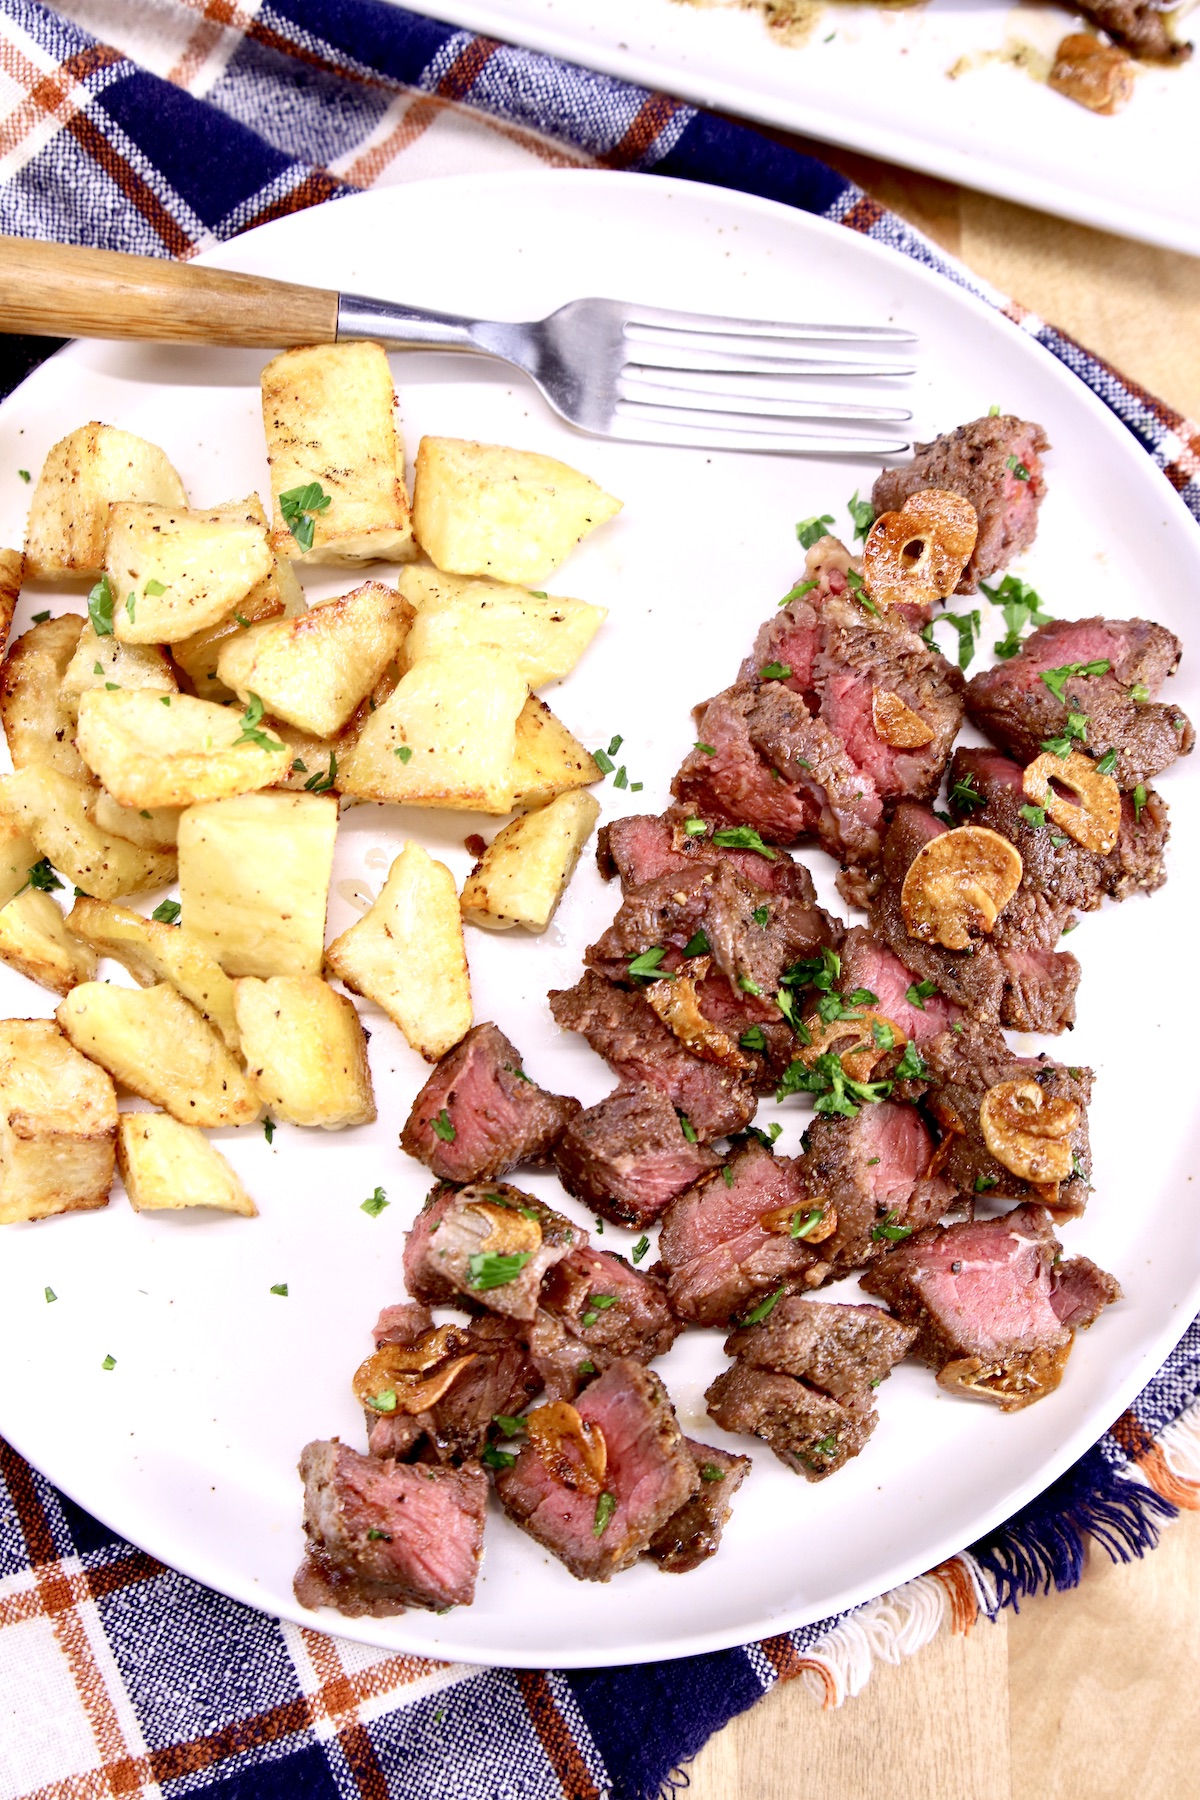 steak bites and potatoes on a plate